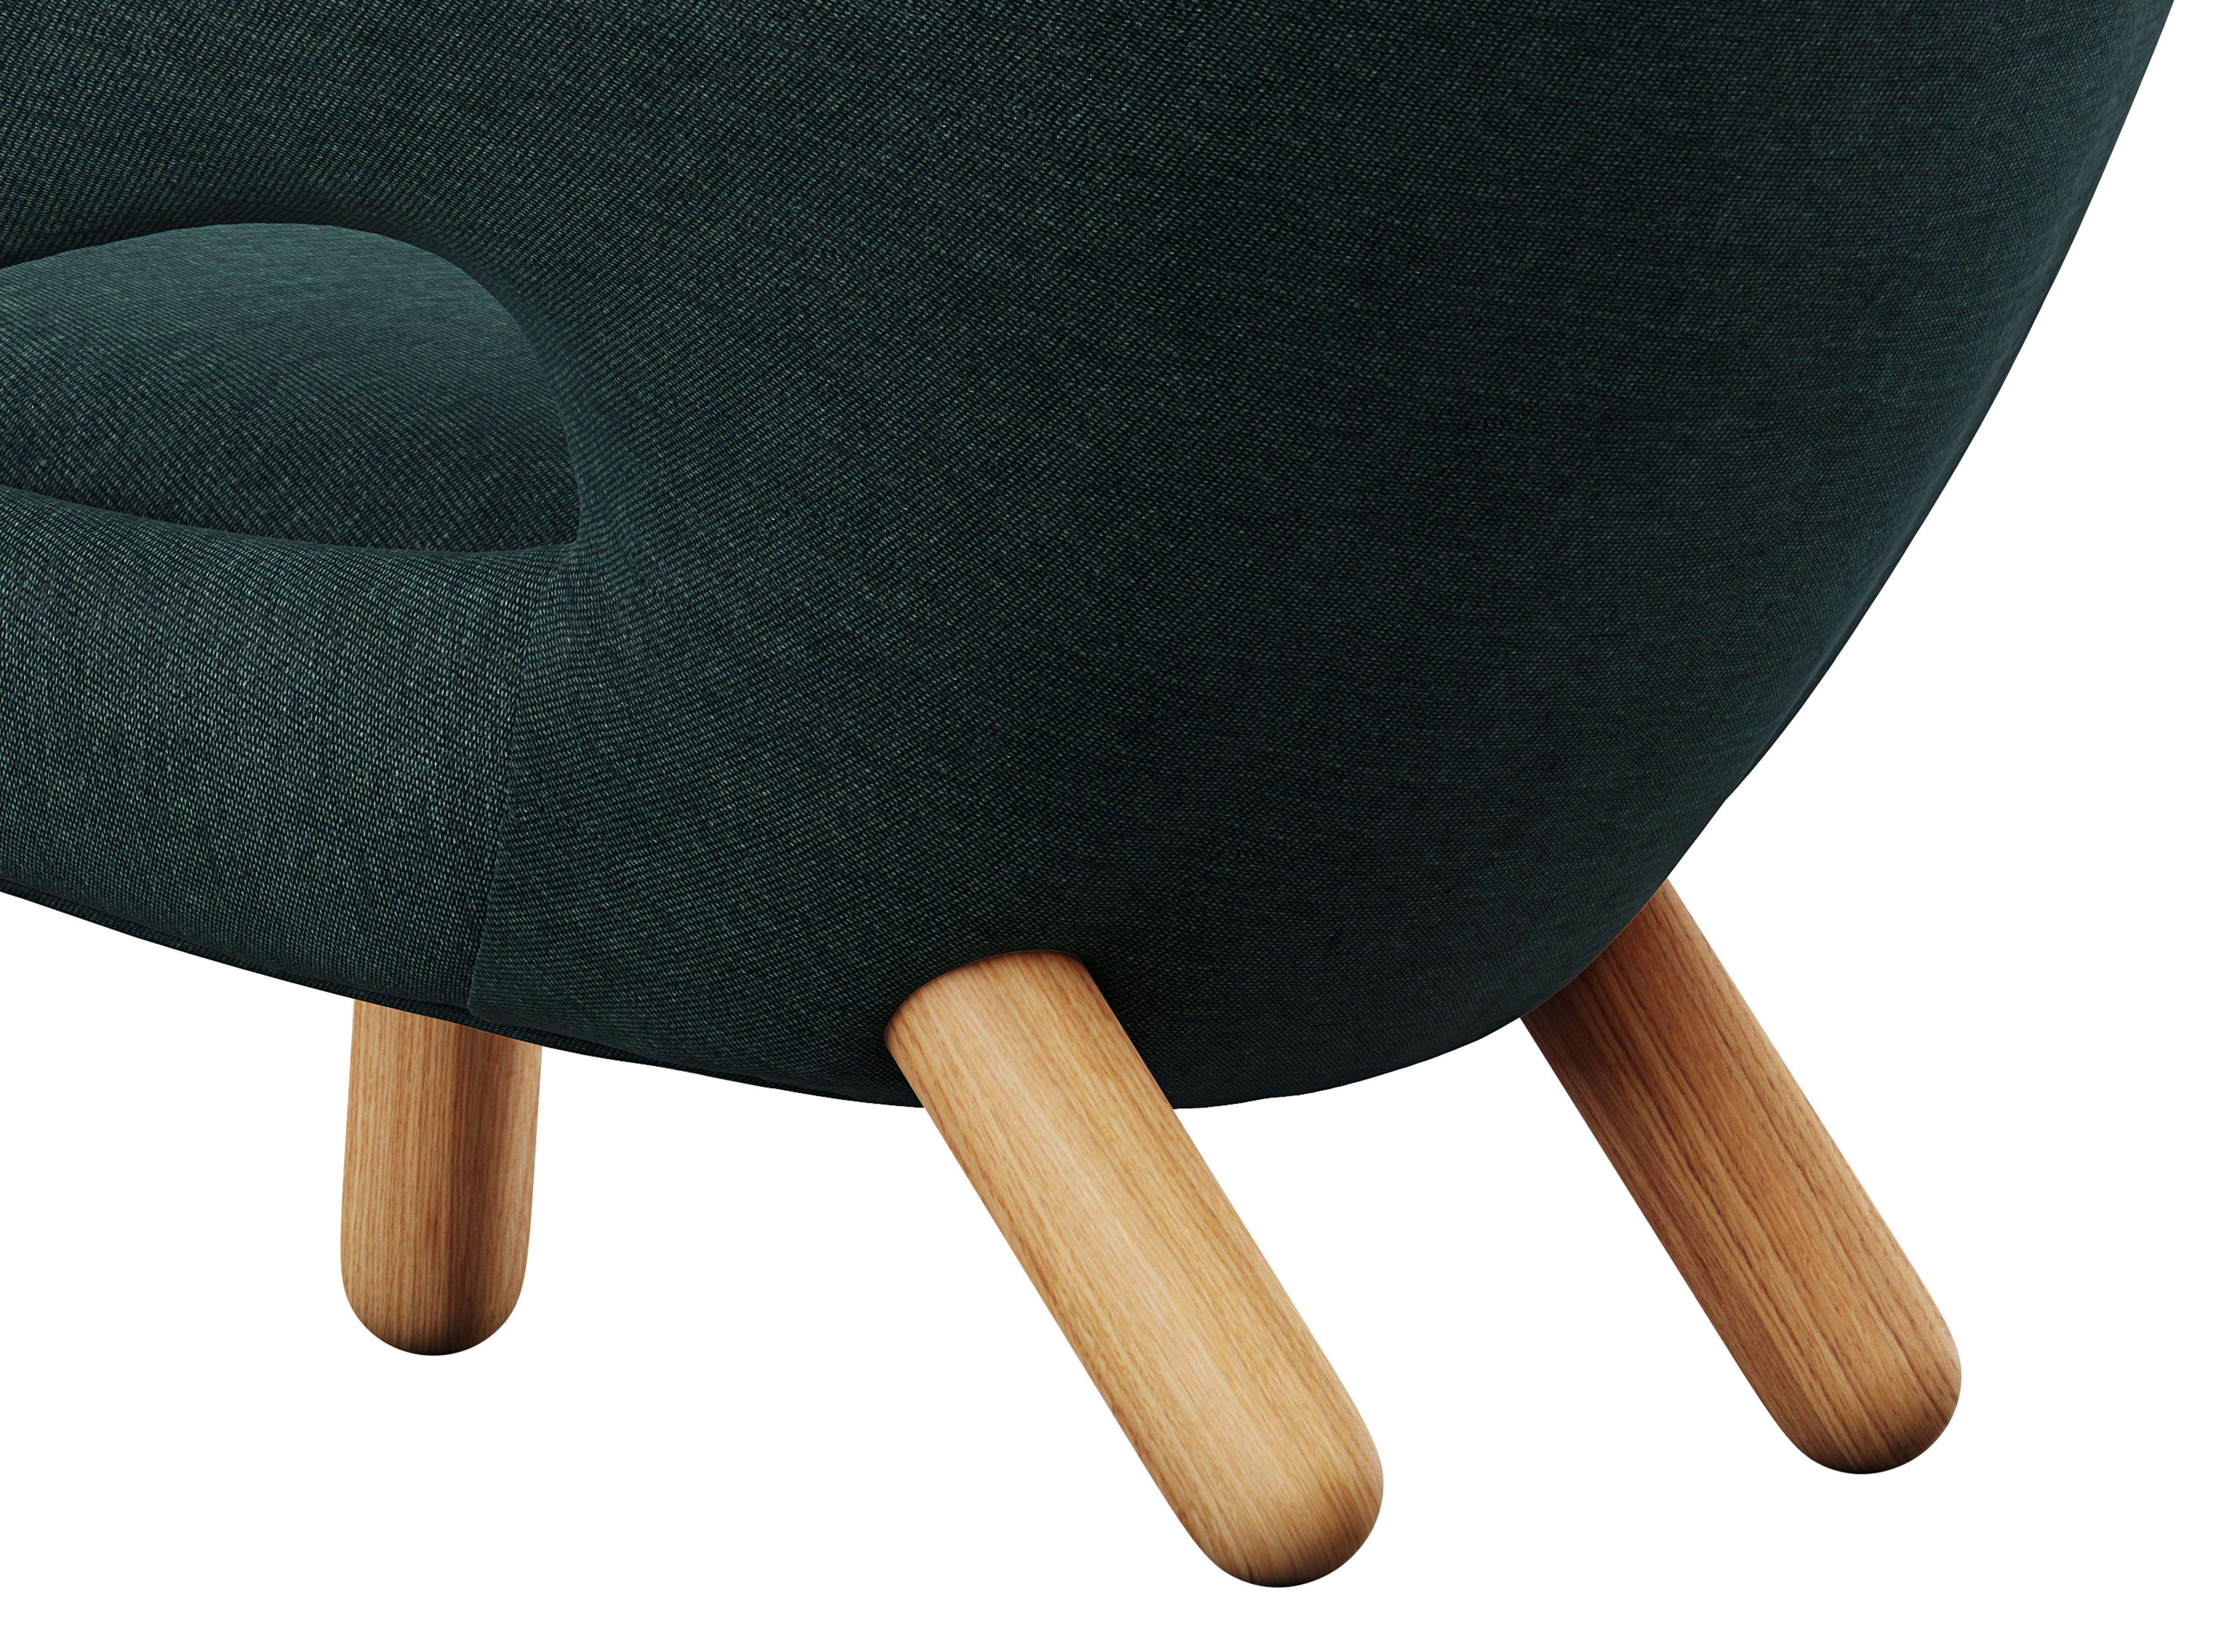 Finn Juhl Pelican Chair Upholstered in Wood and Fabric 2